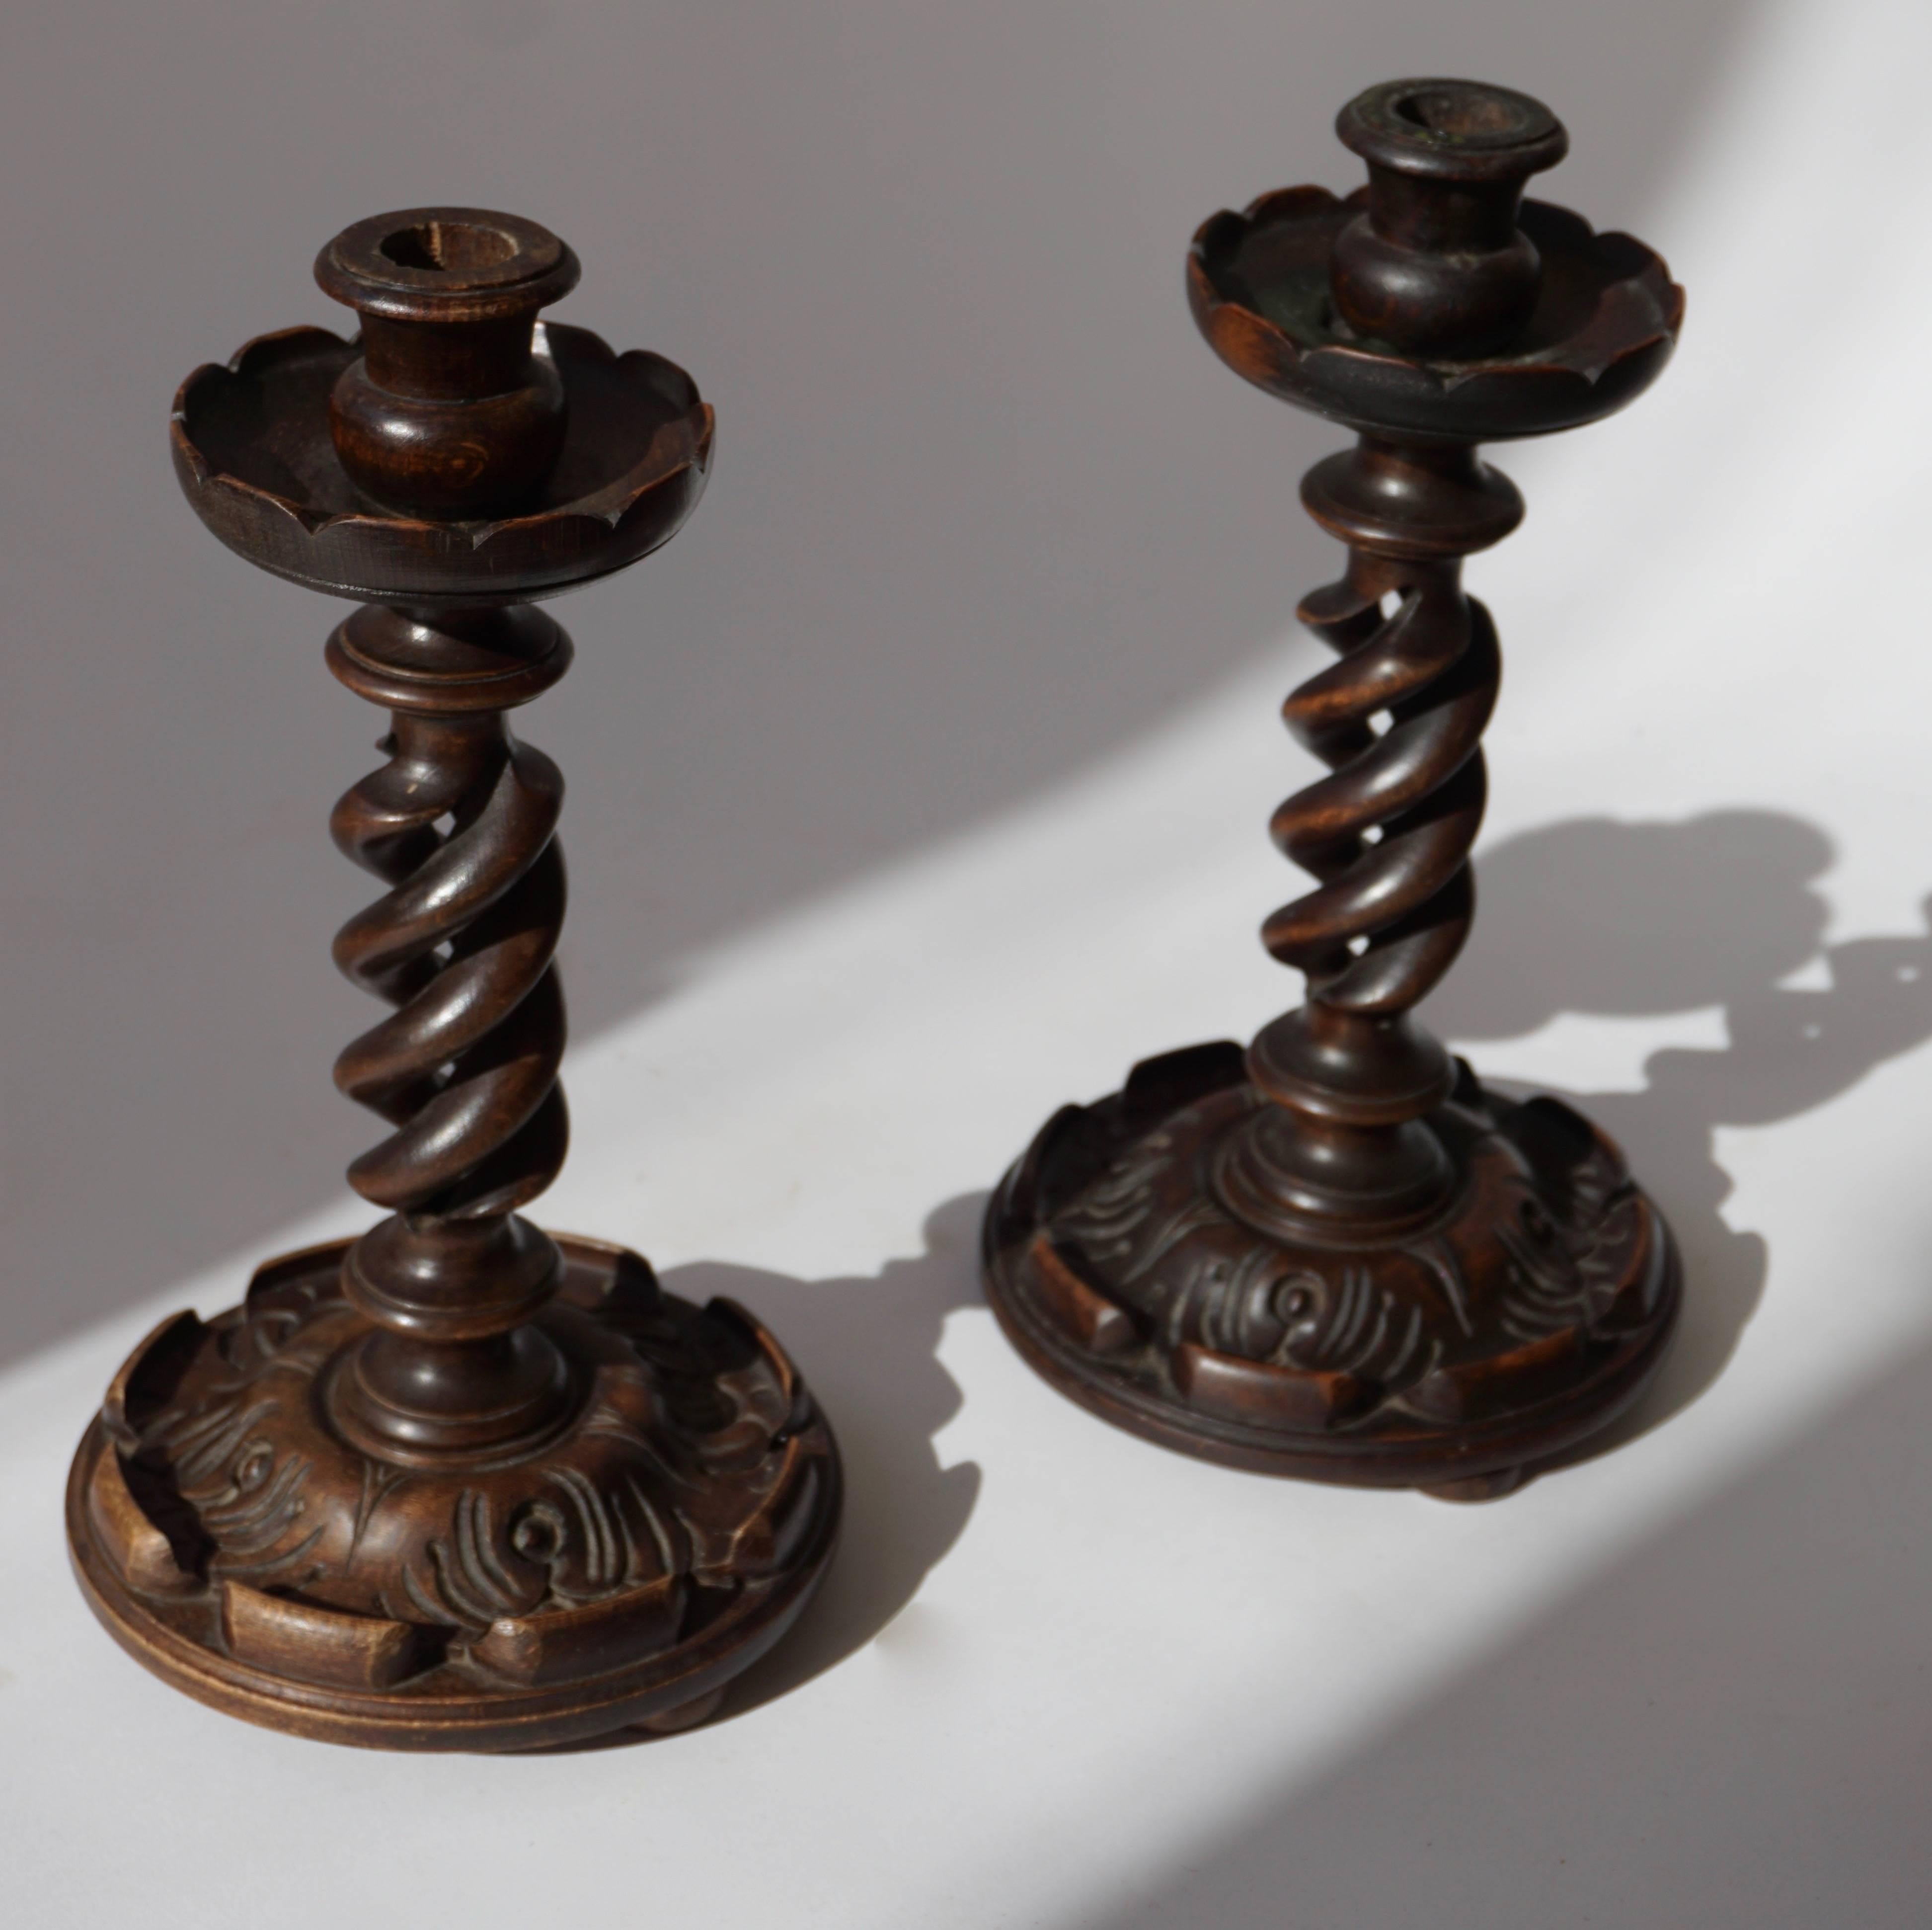 Two twisted candlesticks.
Measures: Diameter 16 cm.
Height 29 cm.